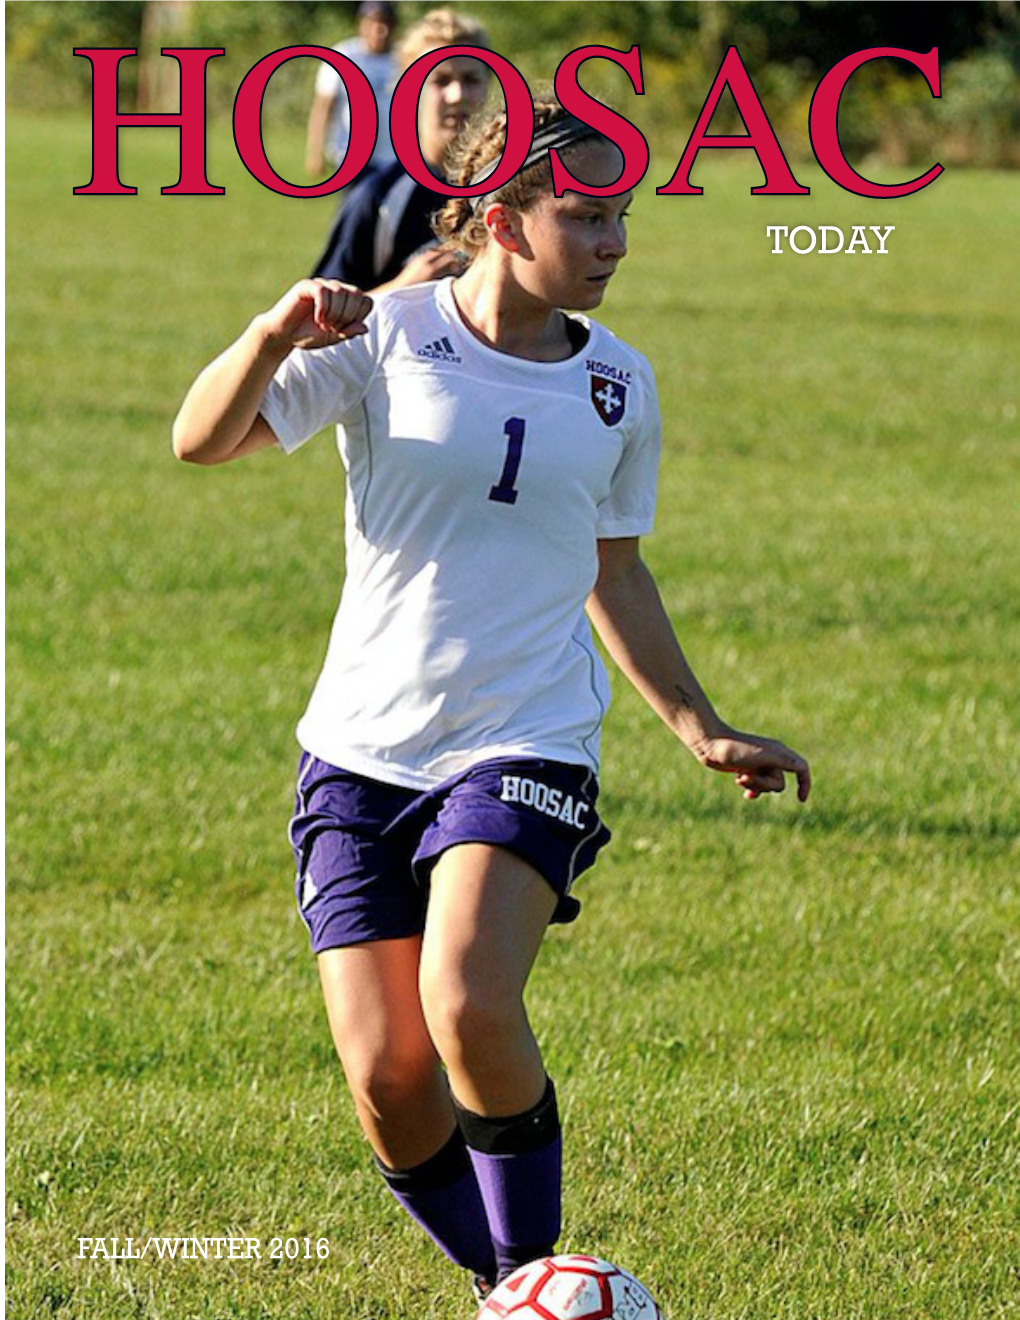 FALL/WINTER 2016 HOOSAC TODAY a Message from Dean Foster, Head of School in THIS ISSUE: Message from the Headmaster